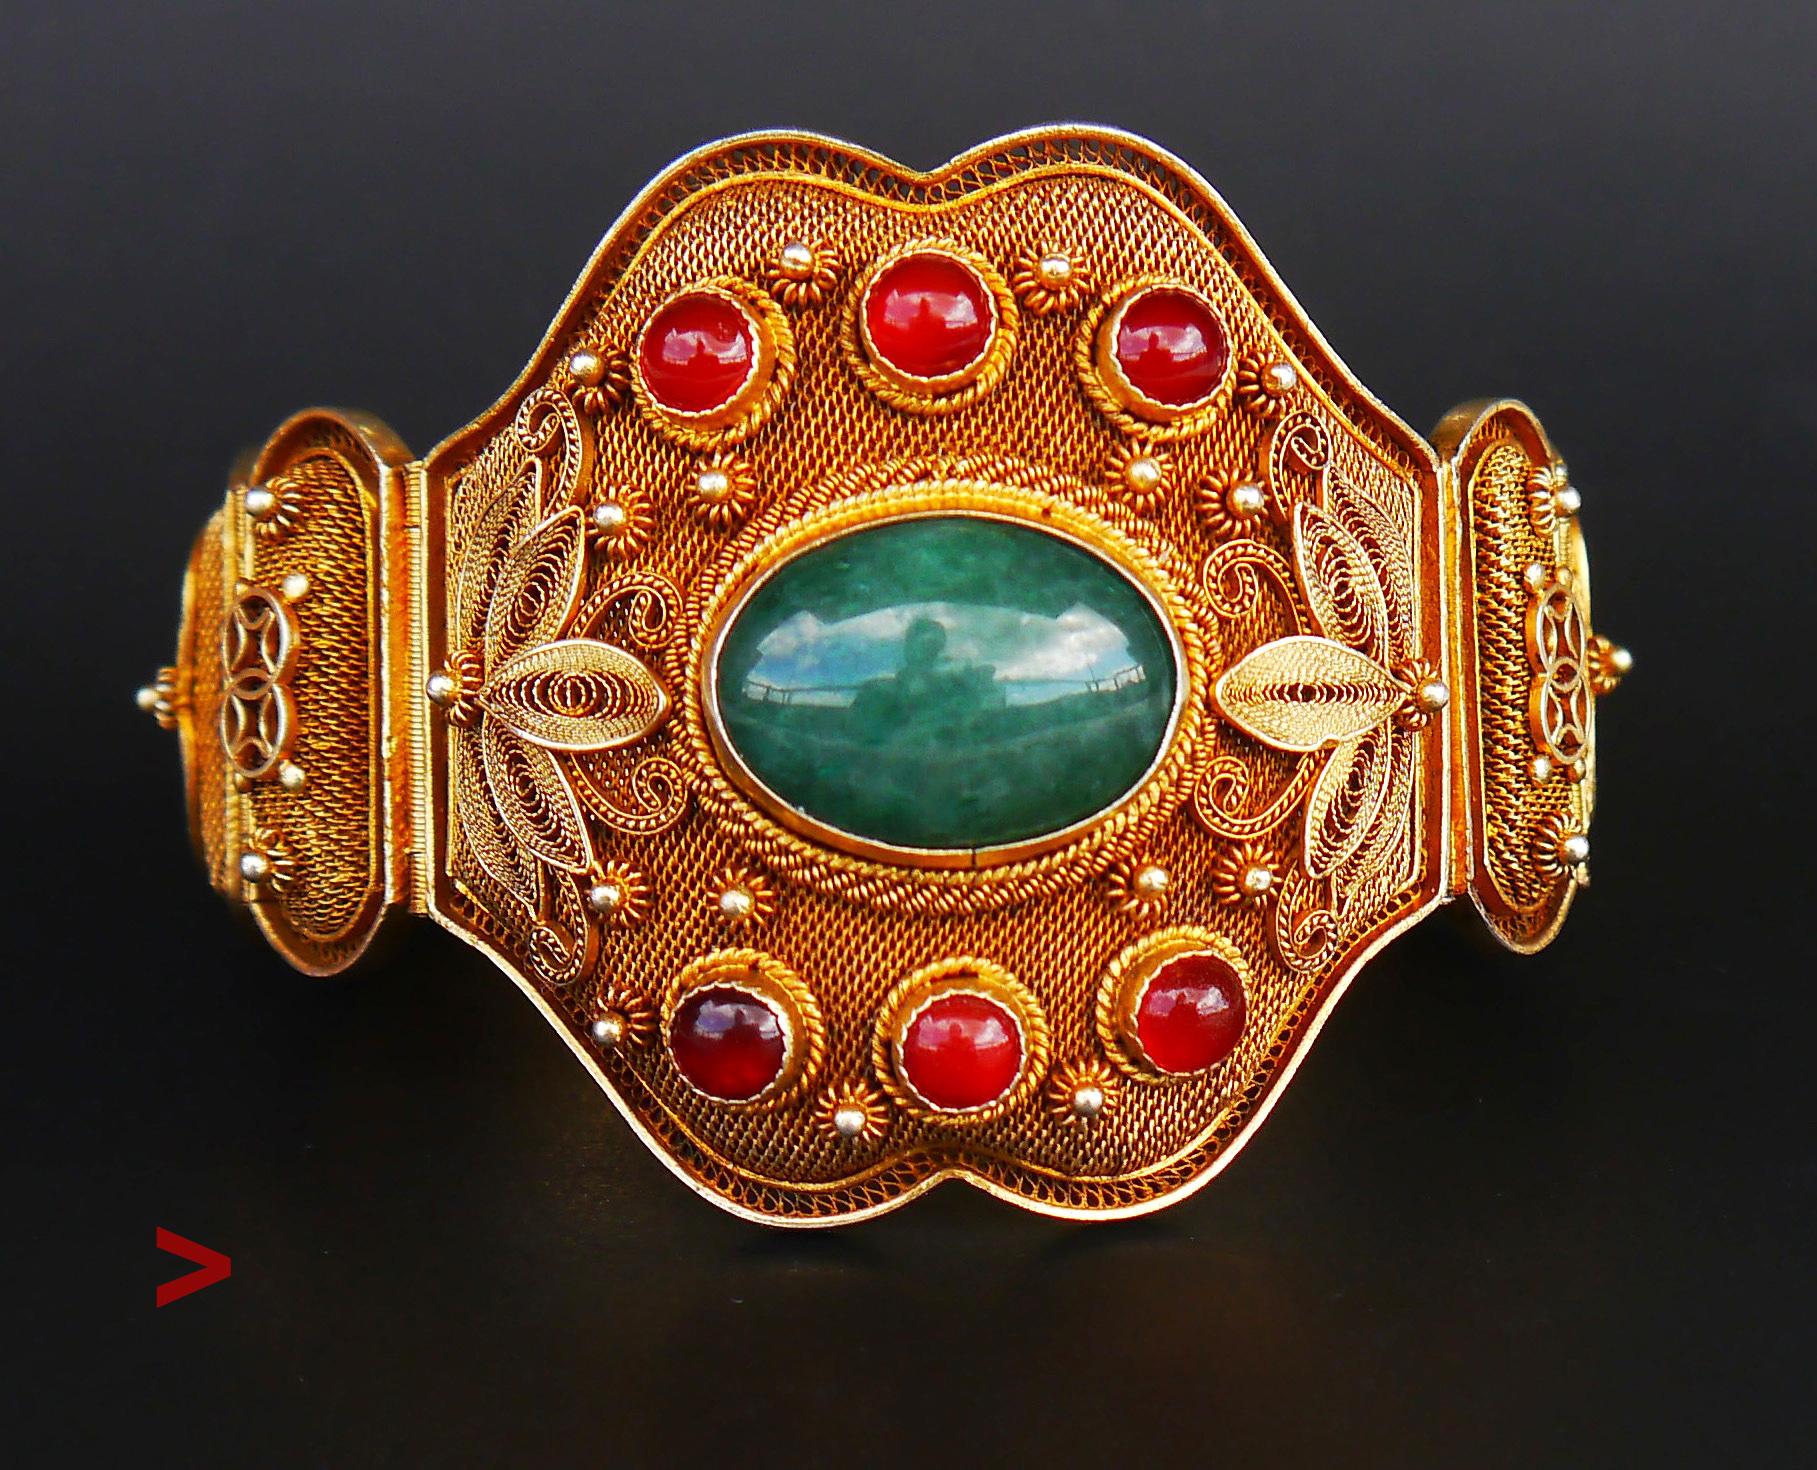 Old beautiful Chinese bracelet of the finest quality.

There are 3 large Gilt Silver links made of fine-meshed Silver with multiple filigree elements soldered on.
Large bezel set natural dark green jade cut cabochon 20 mm x 15 mm x ca 8mm deep /